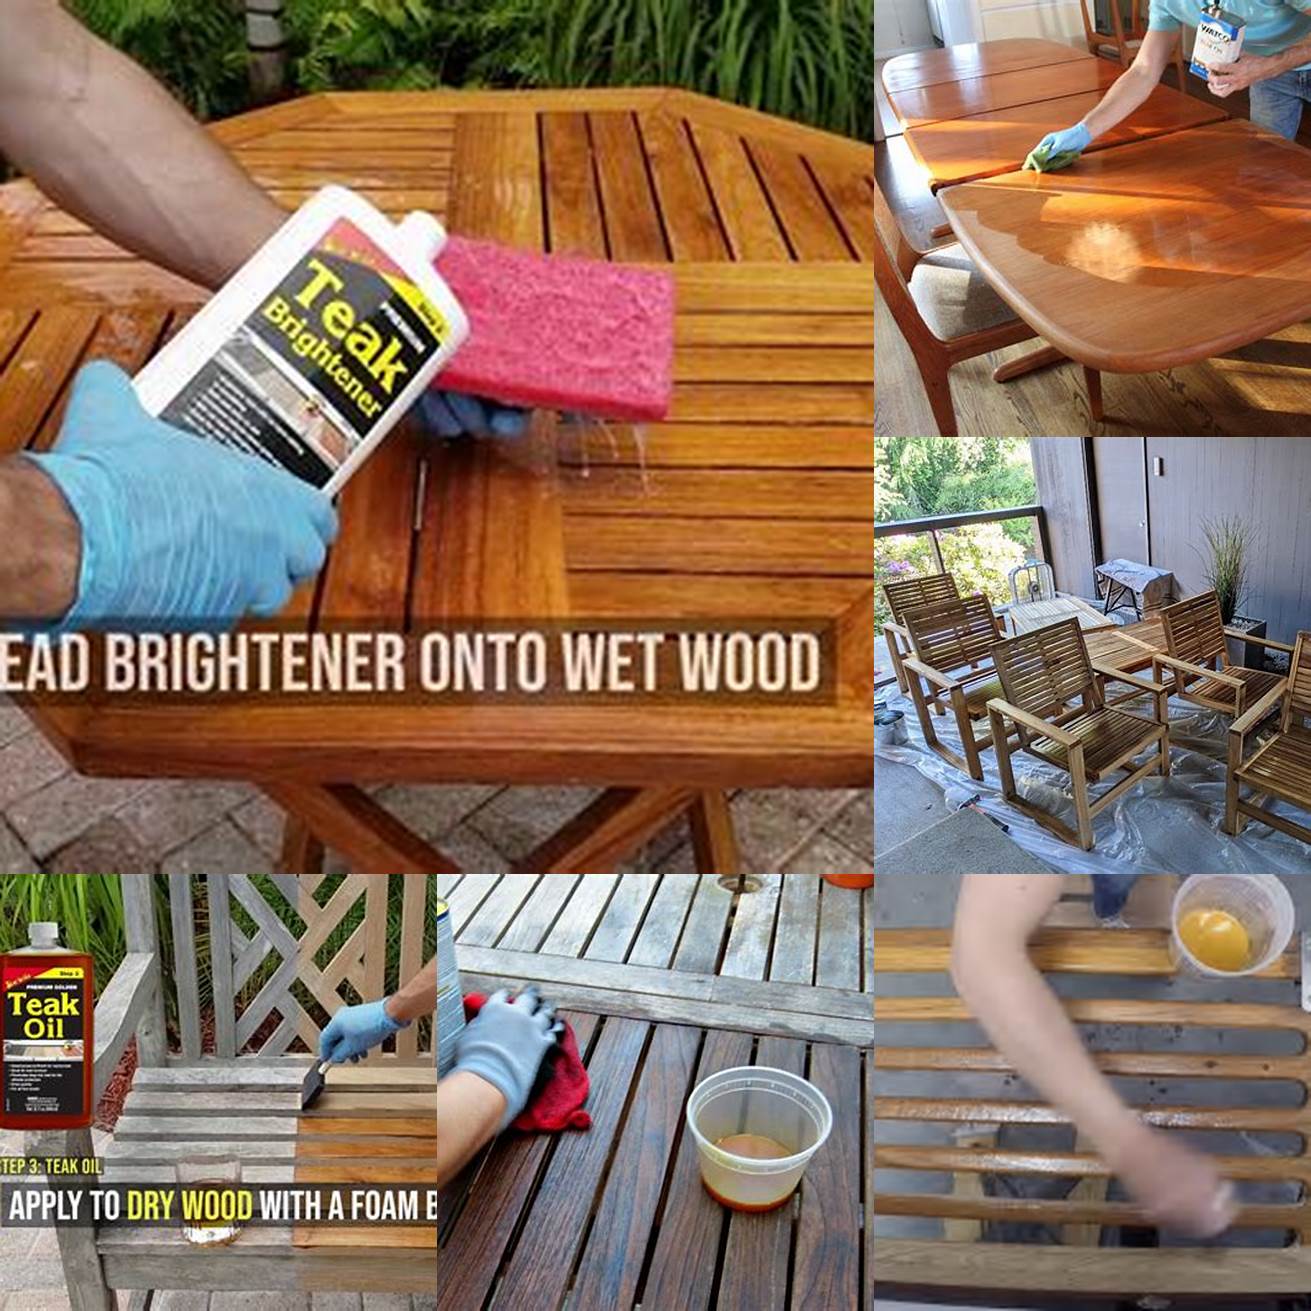 Wiping off excess teak oil